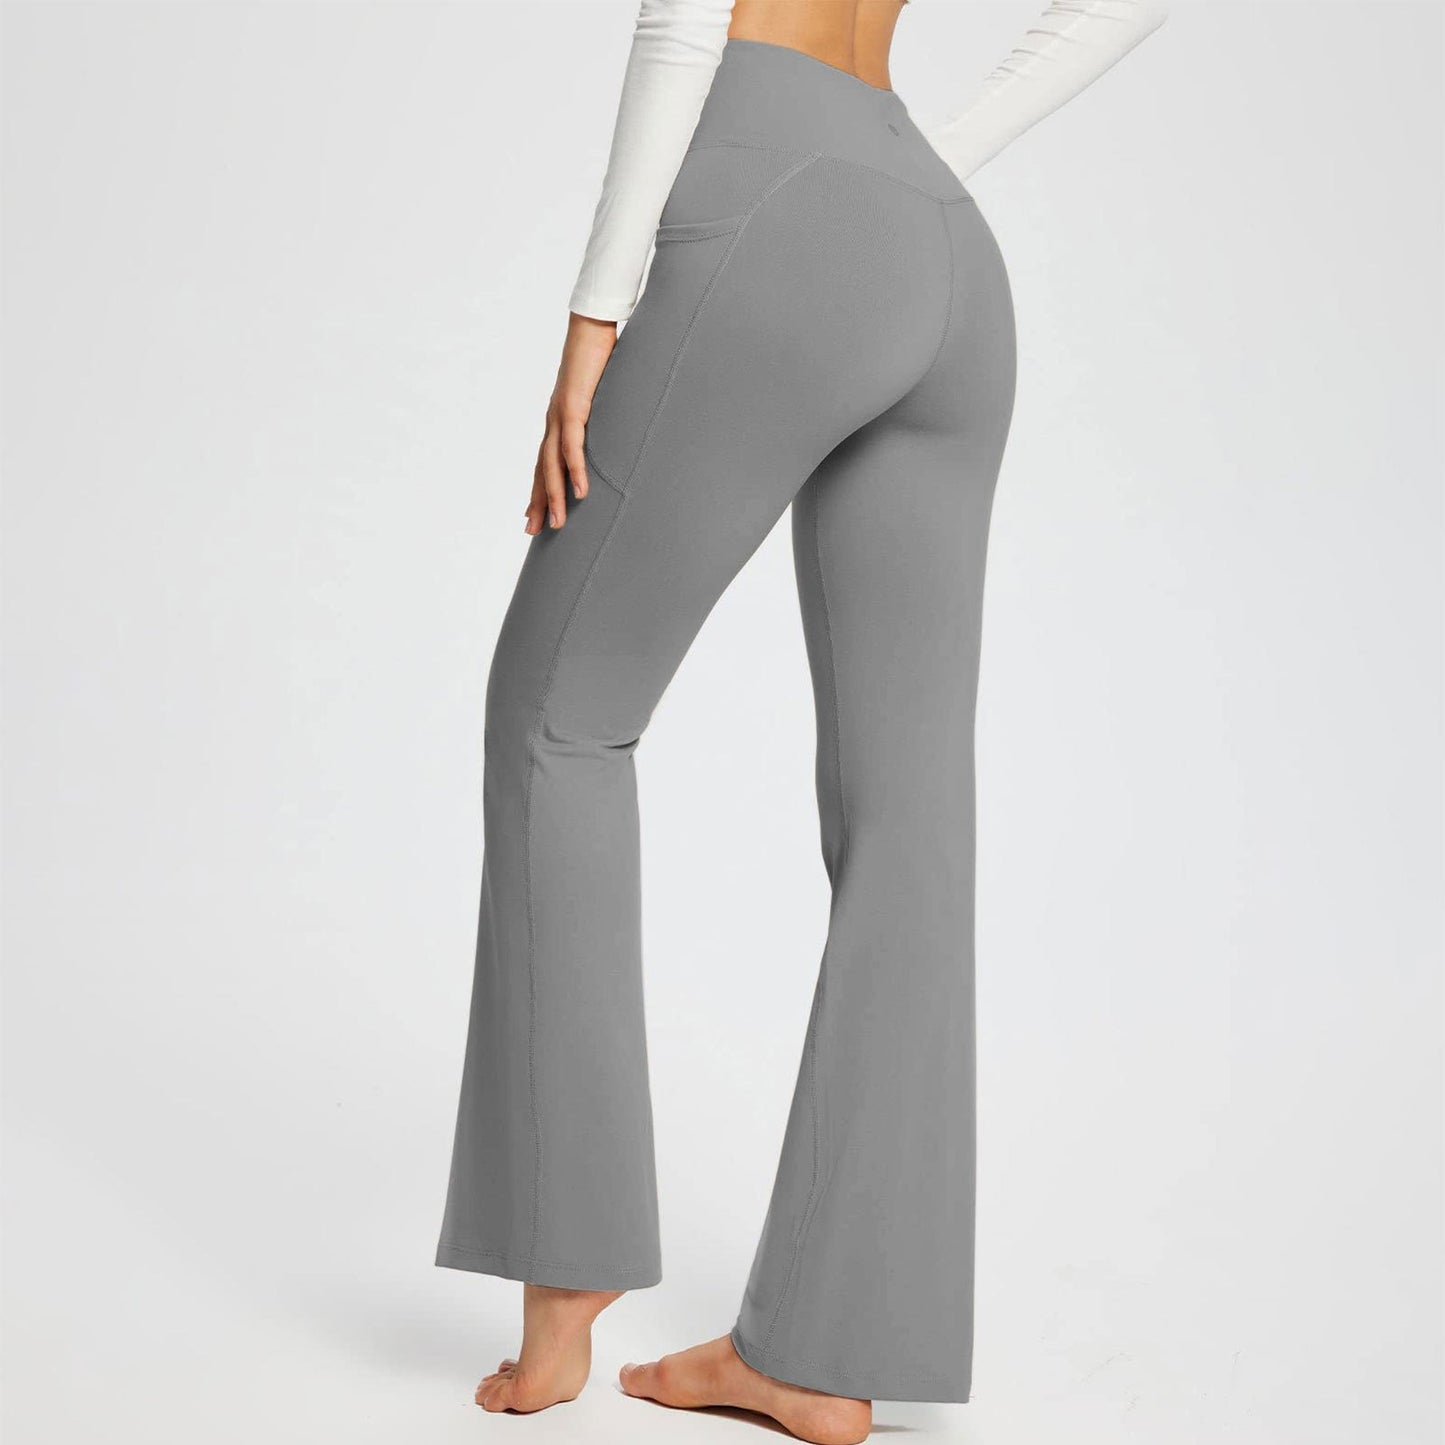 High-Waisted Lift Butt Flare Yoga Leggings With Pockets (Buy 2 Free Shipping)